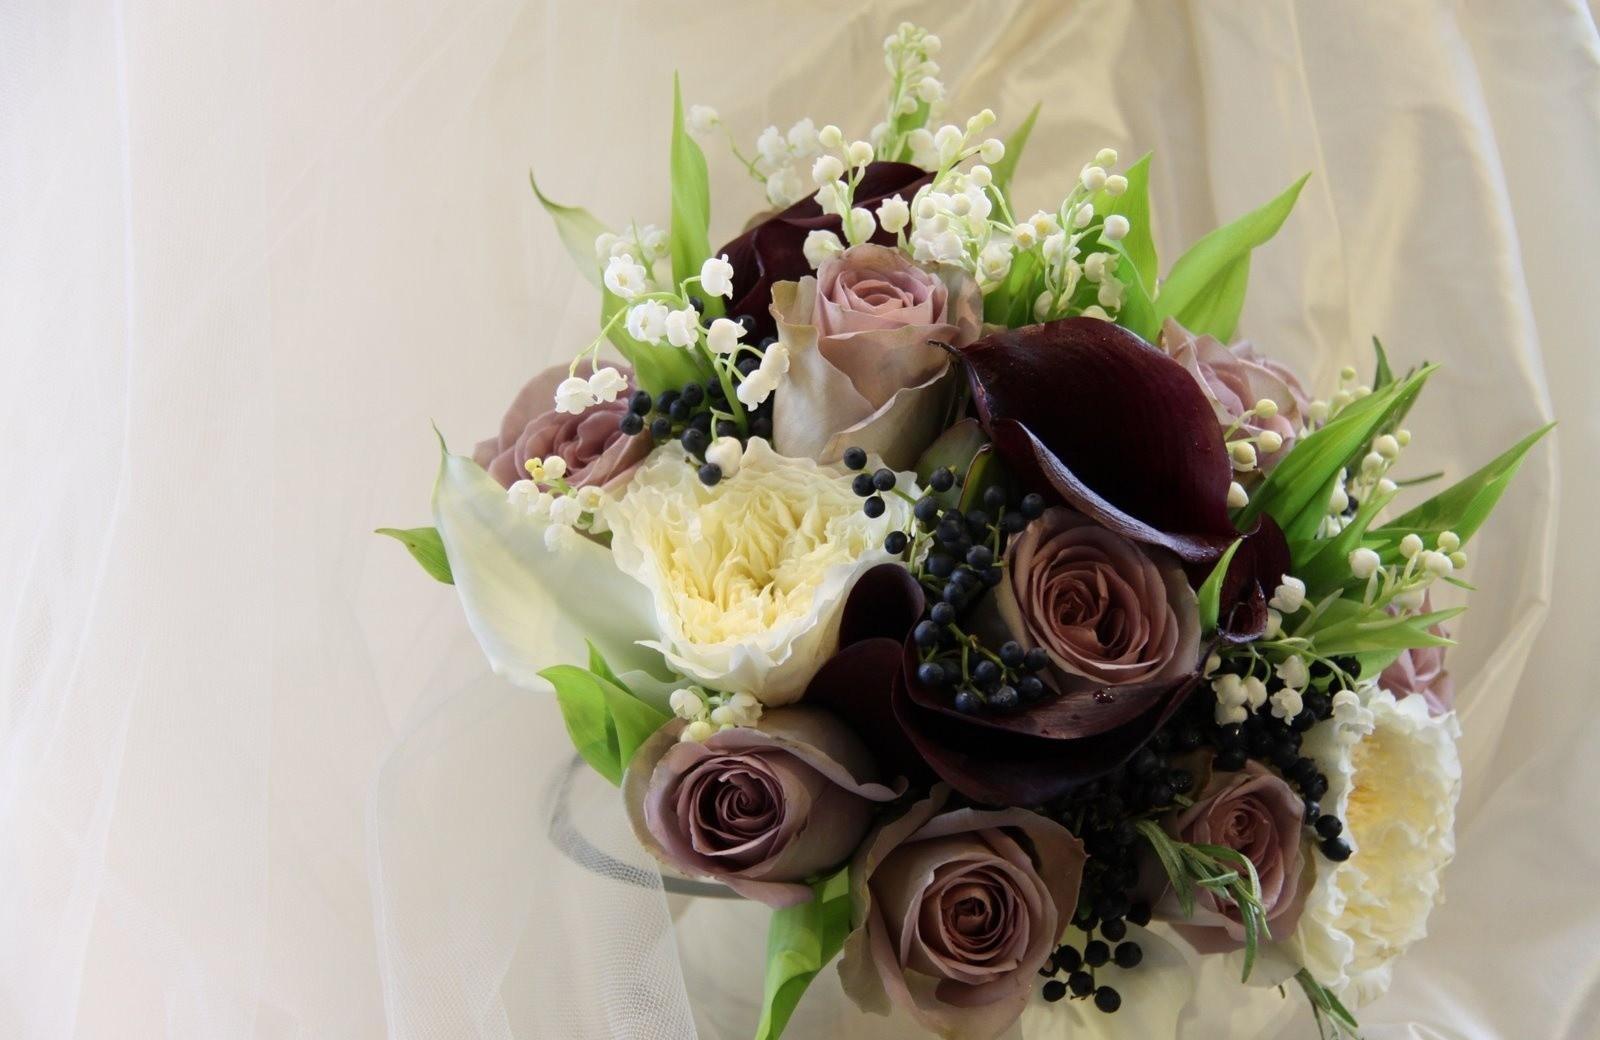 flowers, roses, lily of the valley, bouquet, berry, composition